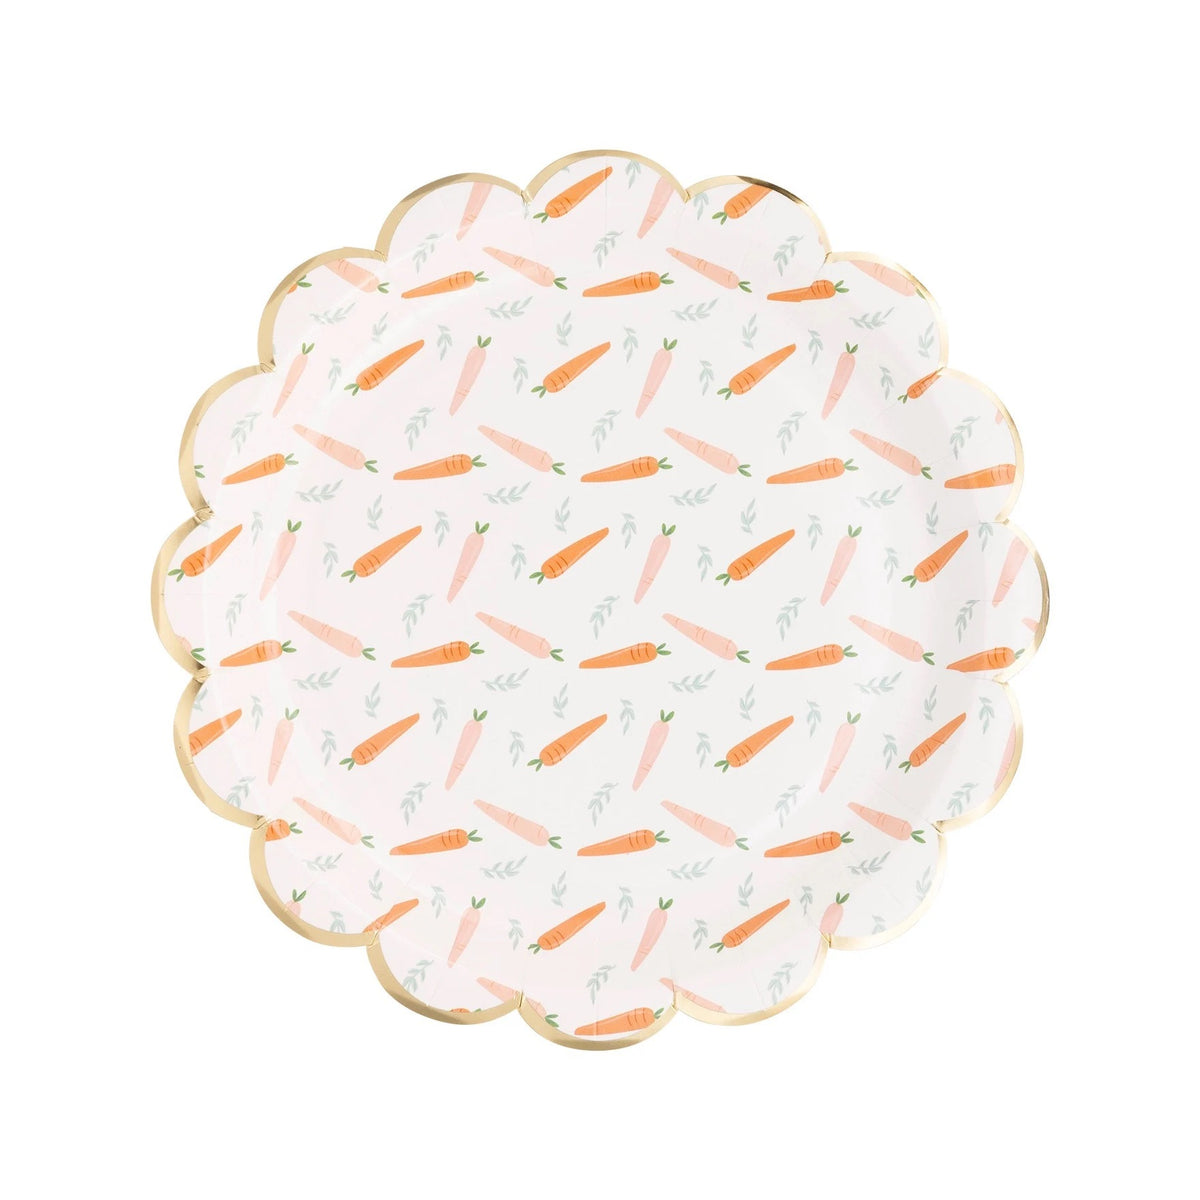 Paper Easter plates with scalloped edges and a carrot design - perfect for an Easter party or brunch